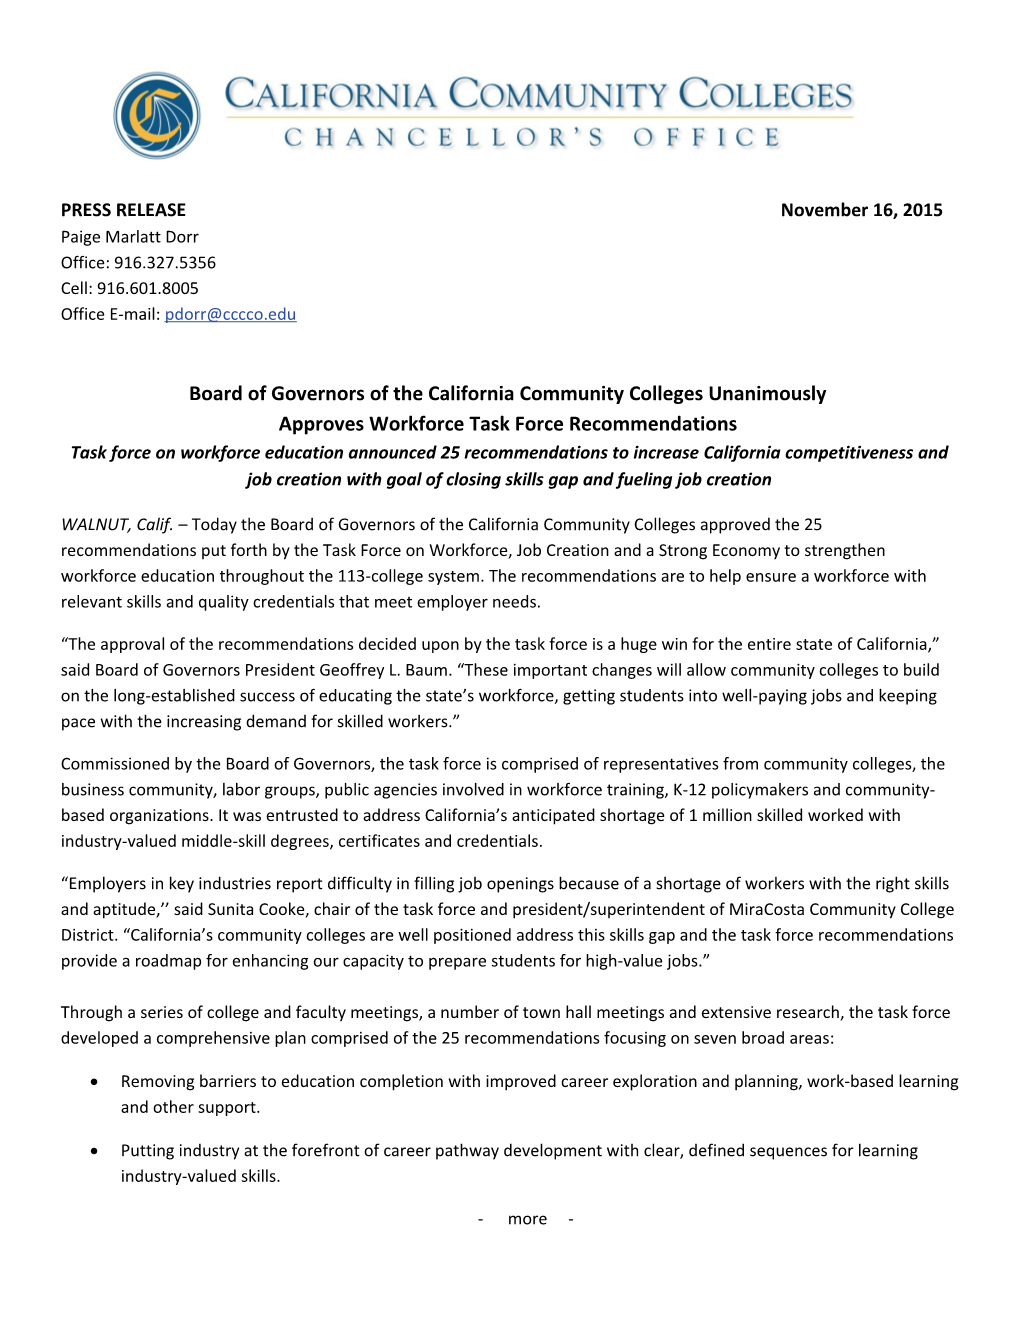 Board of Governors of the California Community Colleges Unanimously